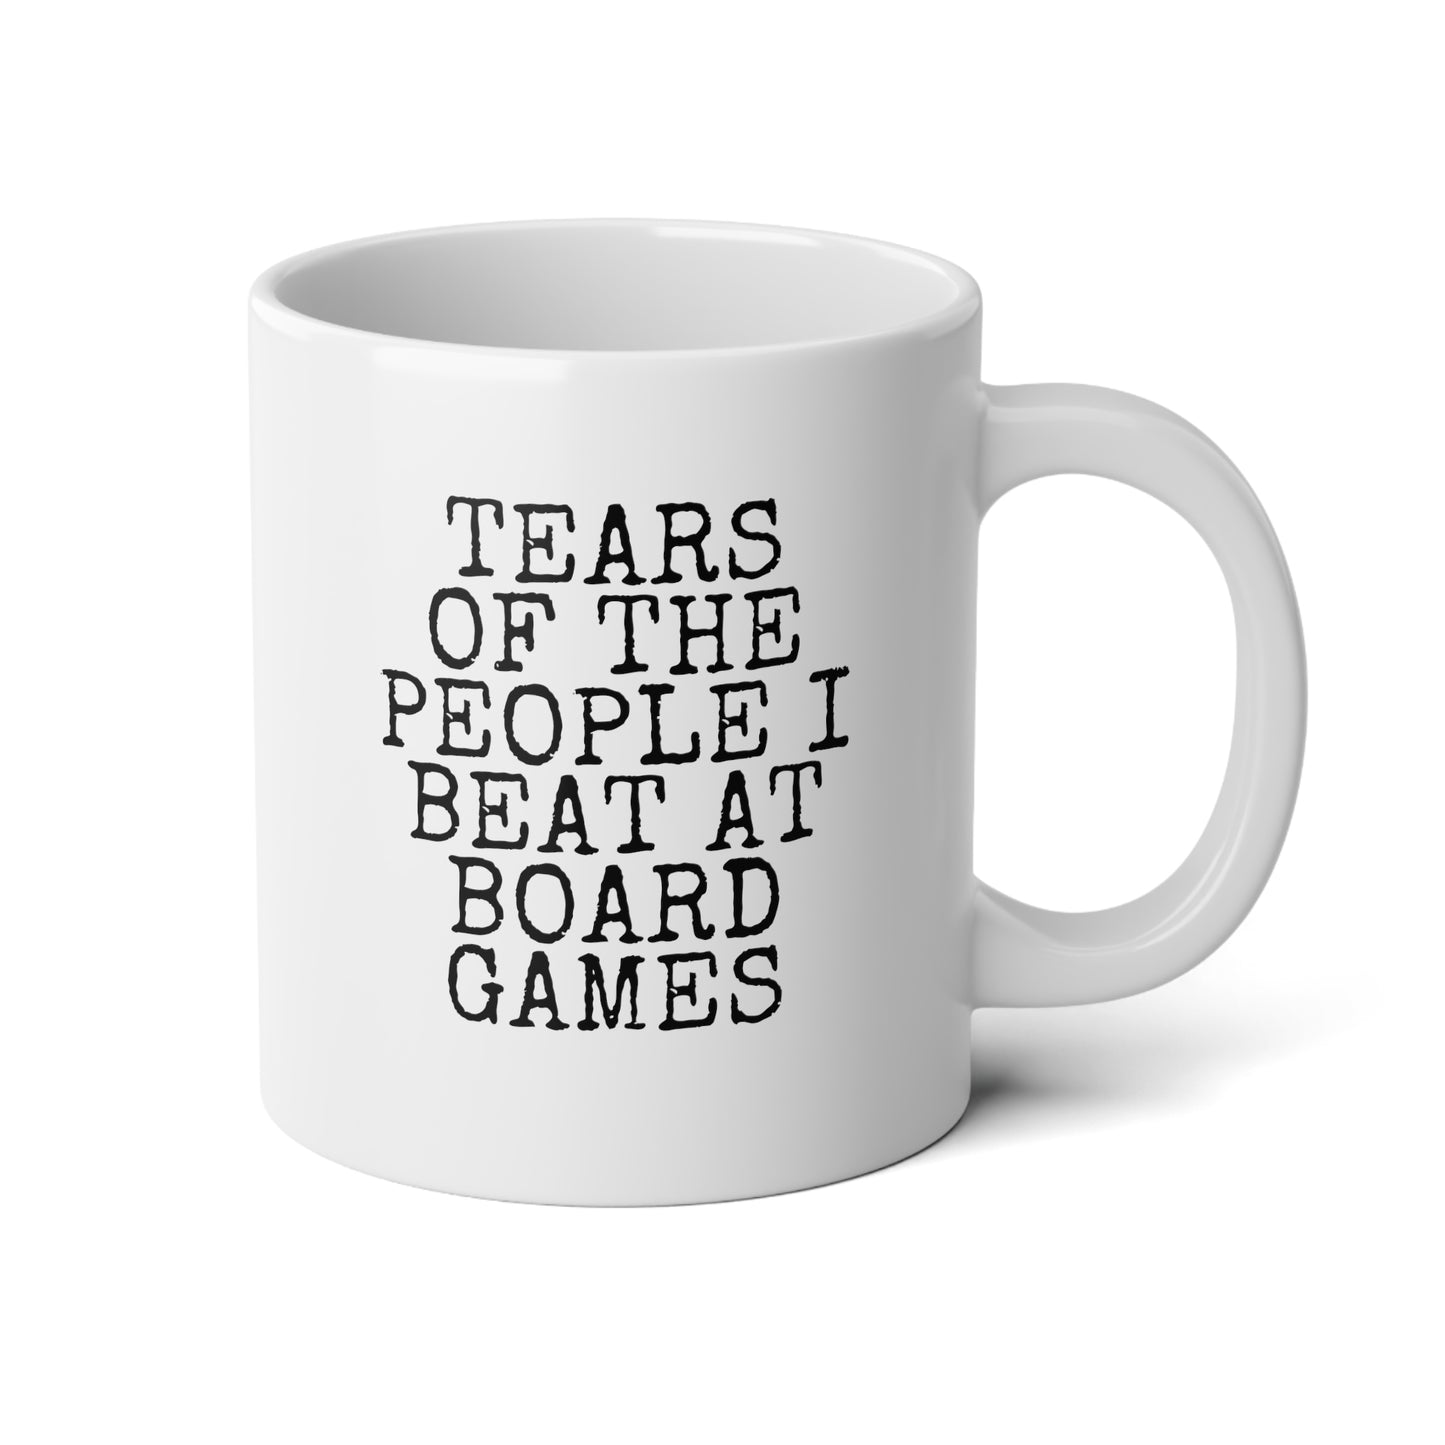 Tears Of The People I Beat At Board Games 20oz white funny large coffee mug gift for friends player him her quote waveywares wavey wares wavywares wavy wares